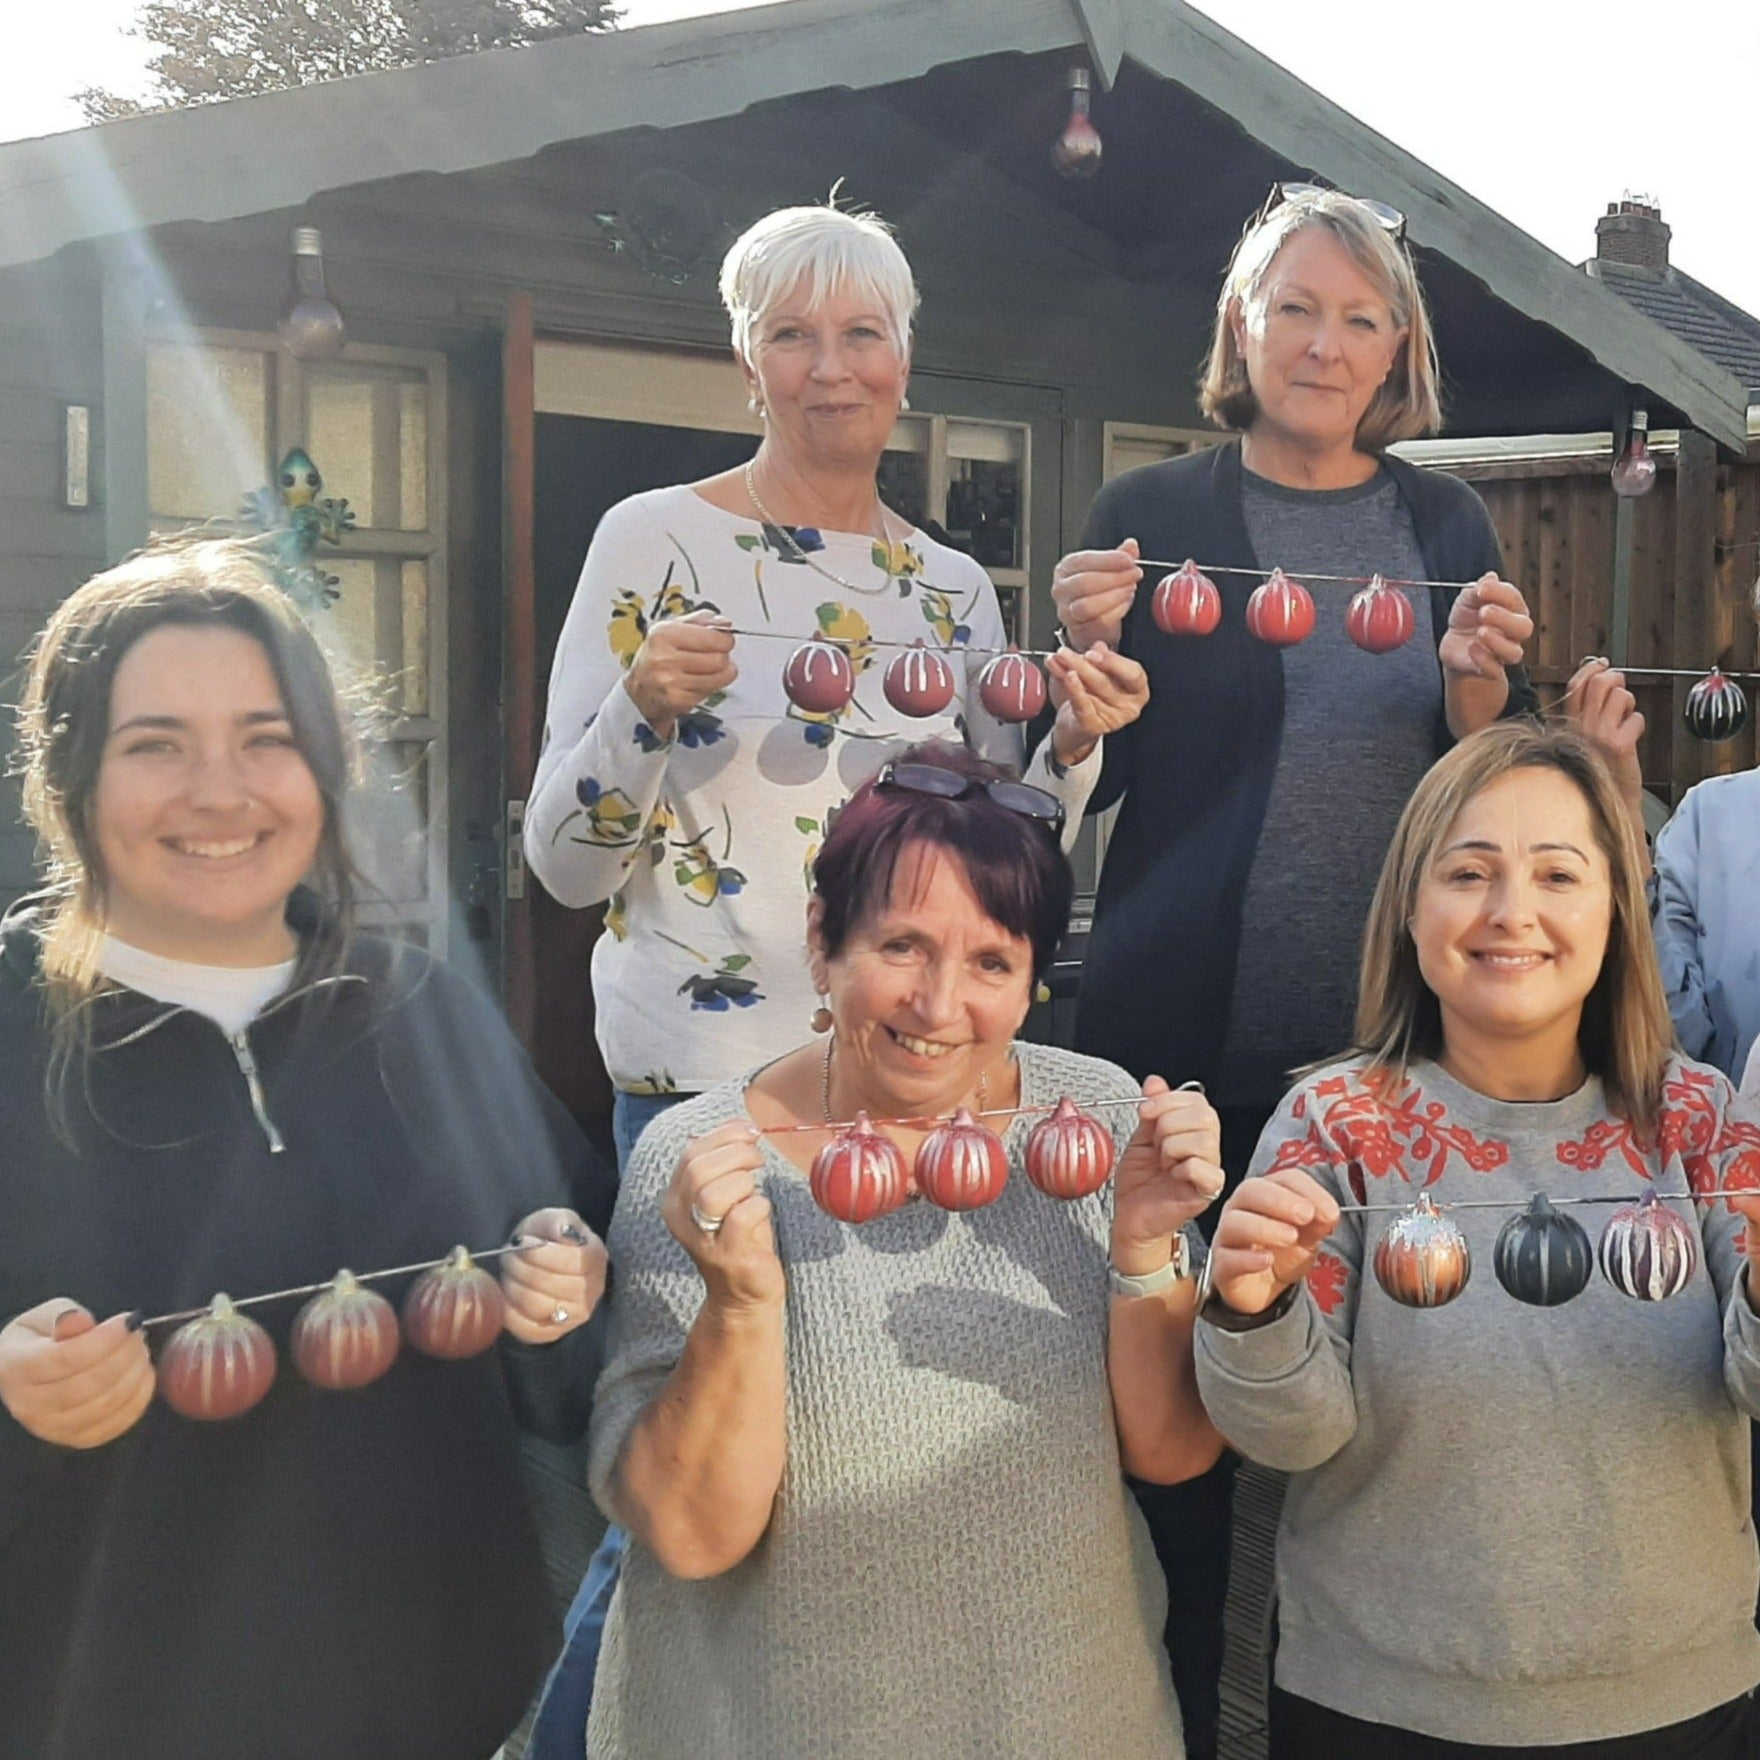 Ladies showing off their hand painted baubles at a Baubles and Bubbles bauble paint party in Stotfold